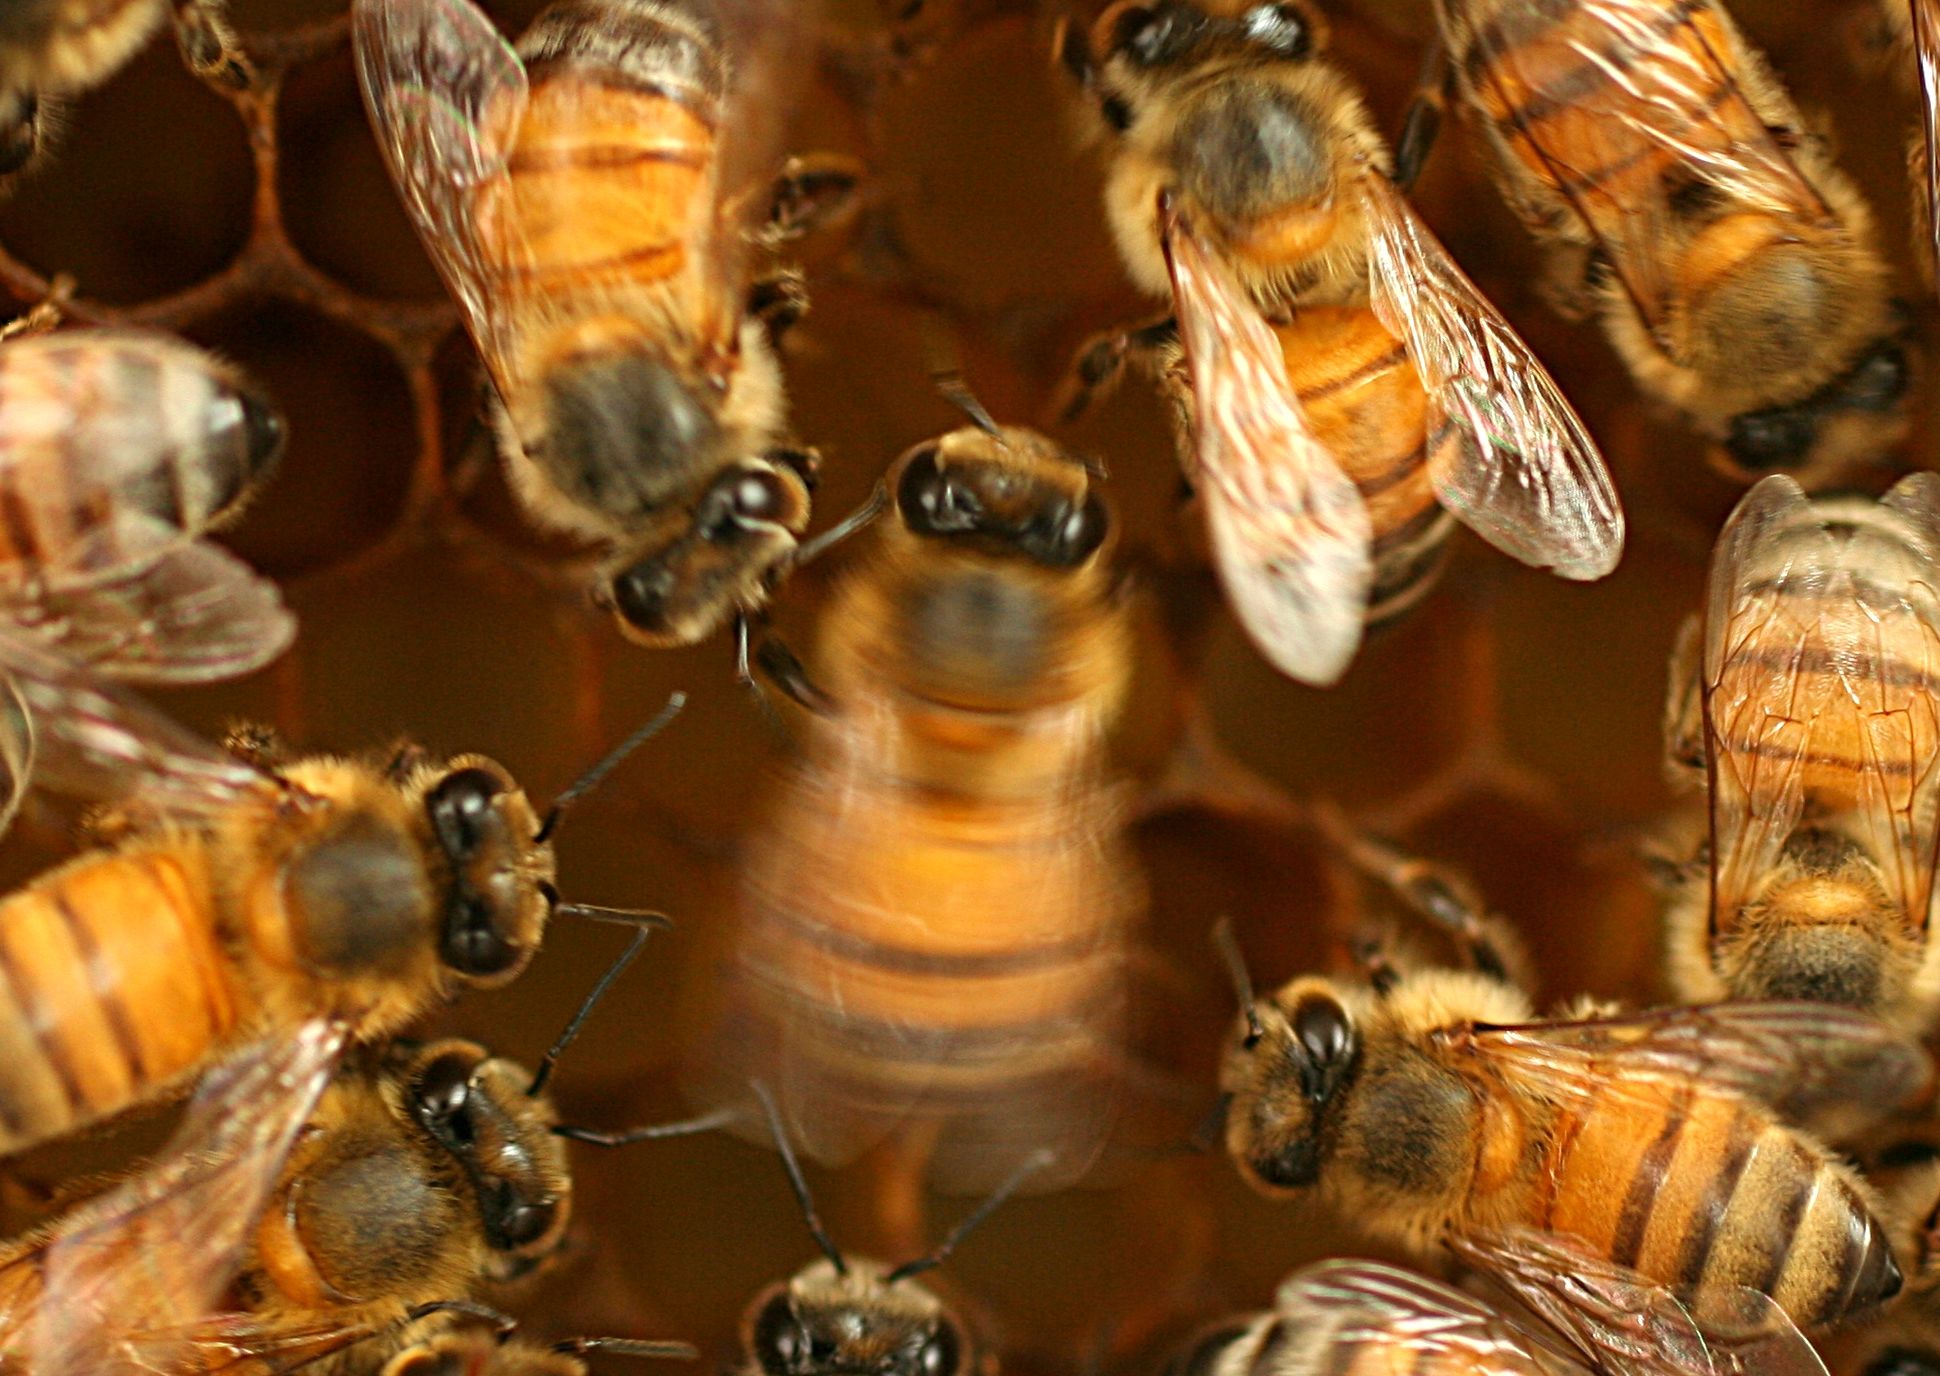 Bees learn waggle dance moves with a little help from their coworkers